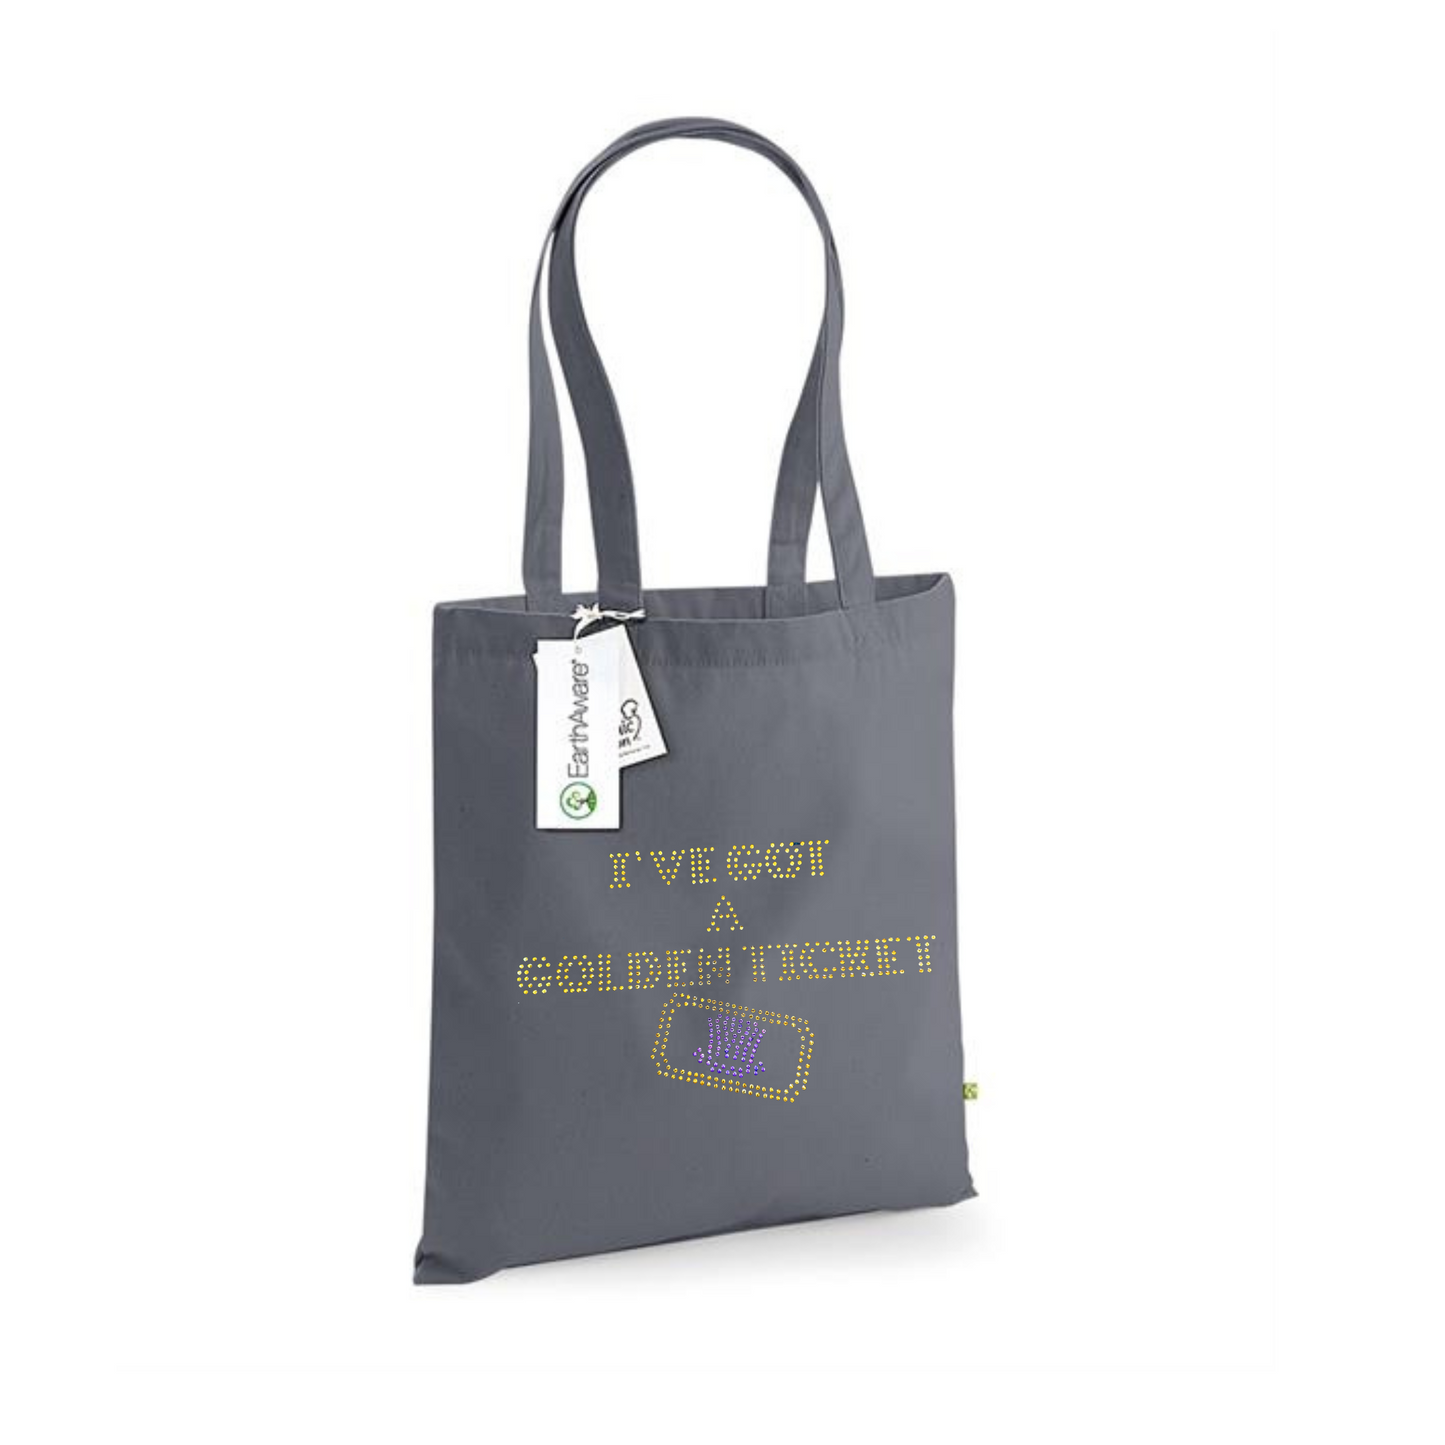 Charlie and the Chocolate Factory the musical Tote Bag